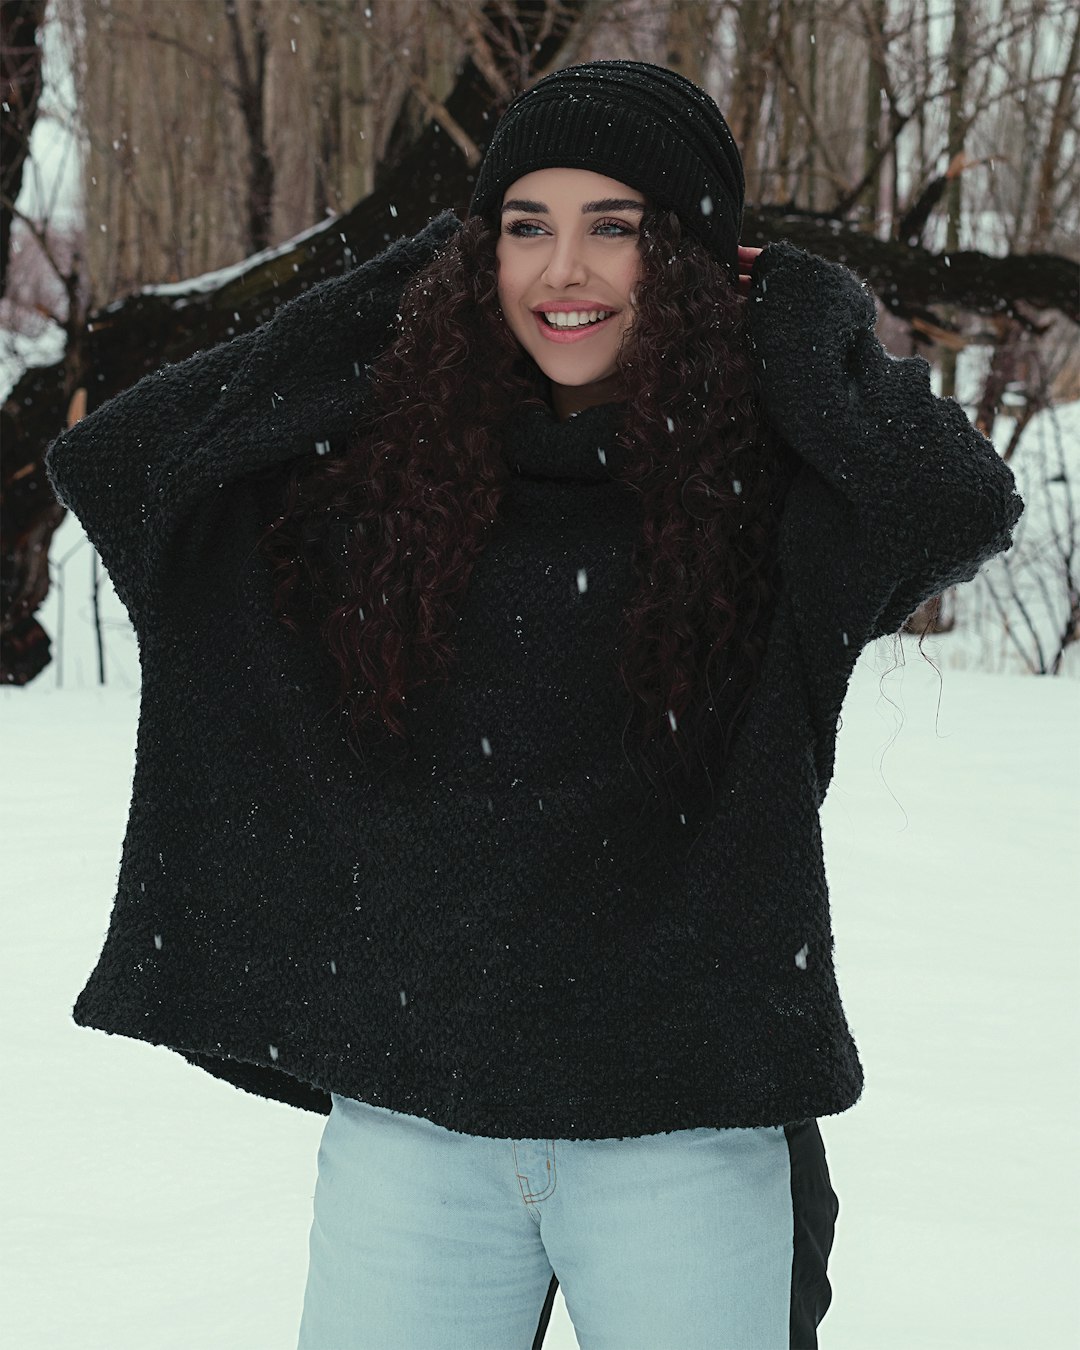 woman in black sweater and white skirt standing on snow covered ground during daytime